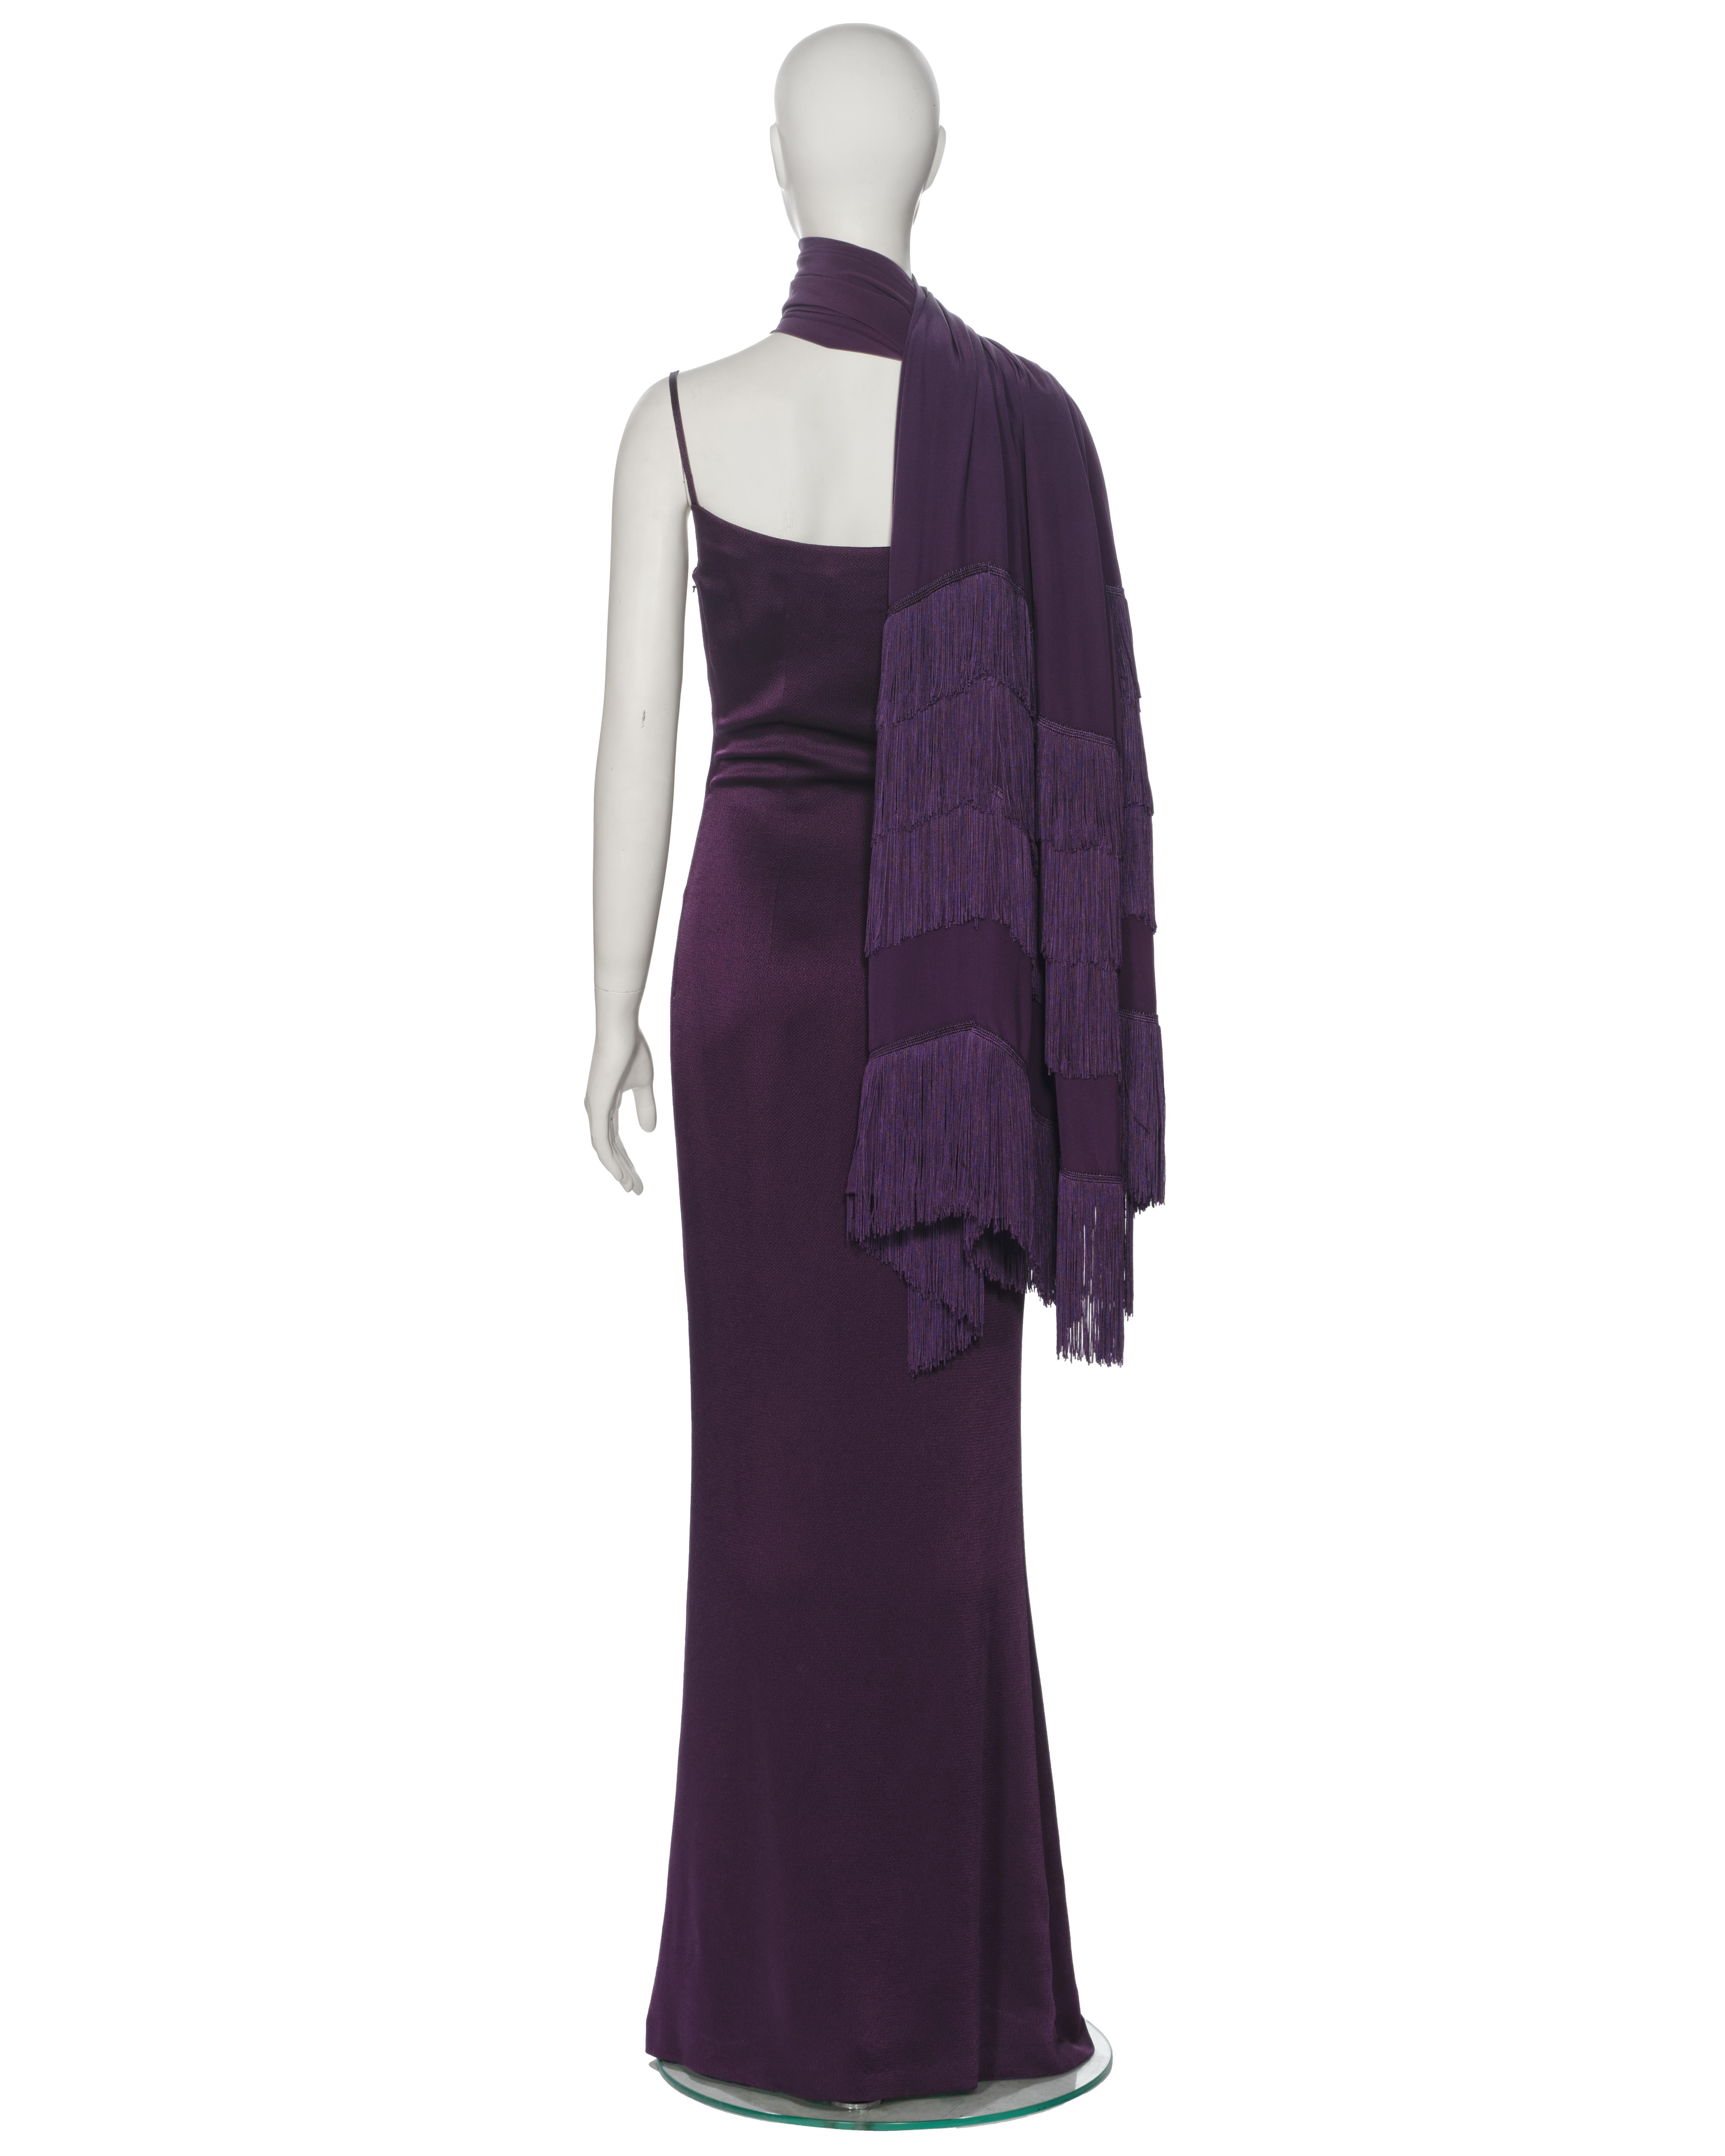 Christian Dior by John Galliano Purple Satin Evening Dress and Shawl, ss 1998 For Sale 5